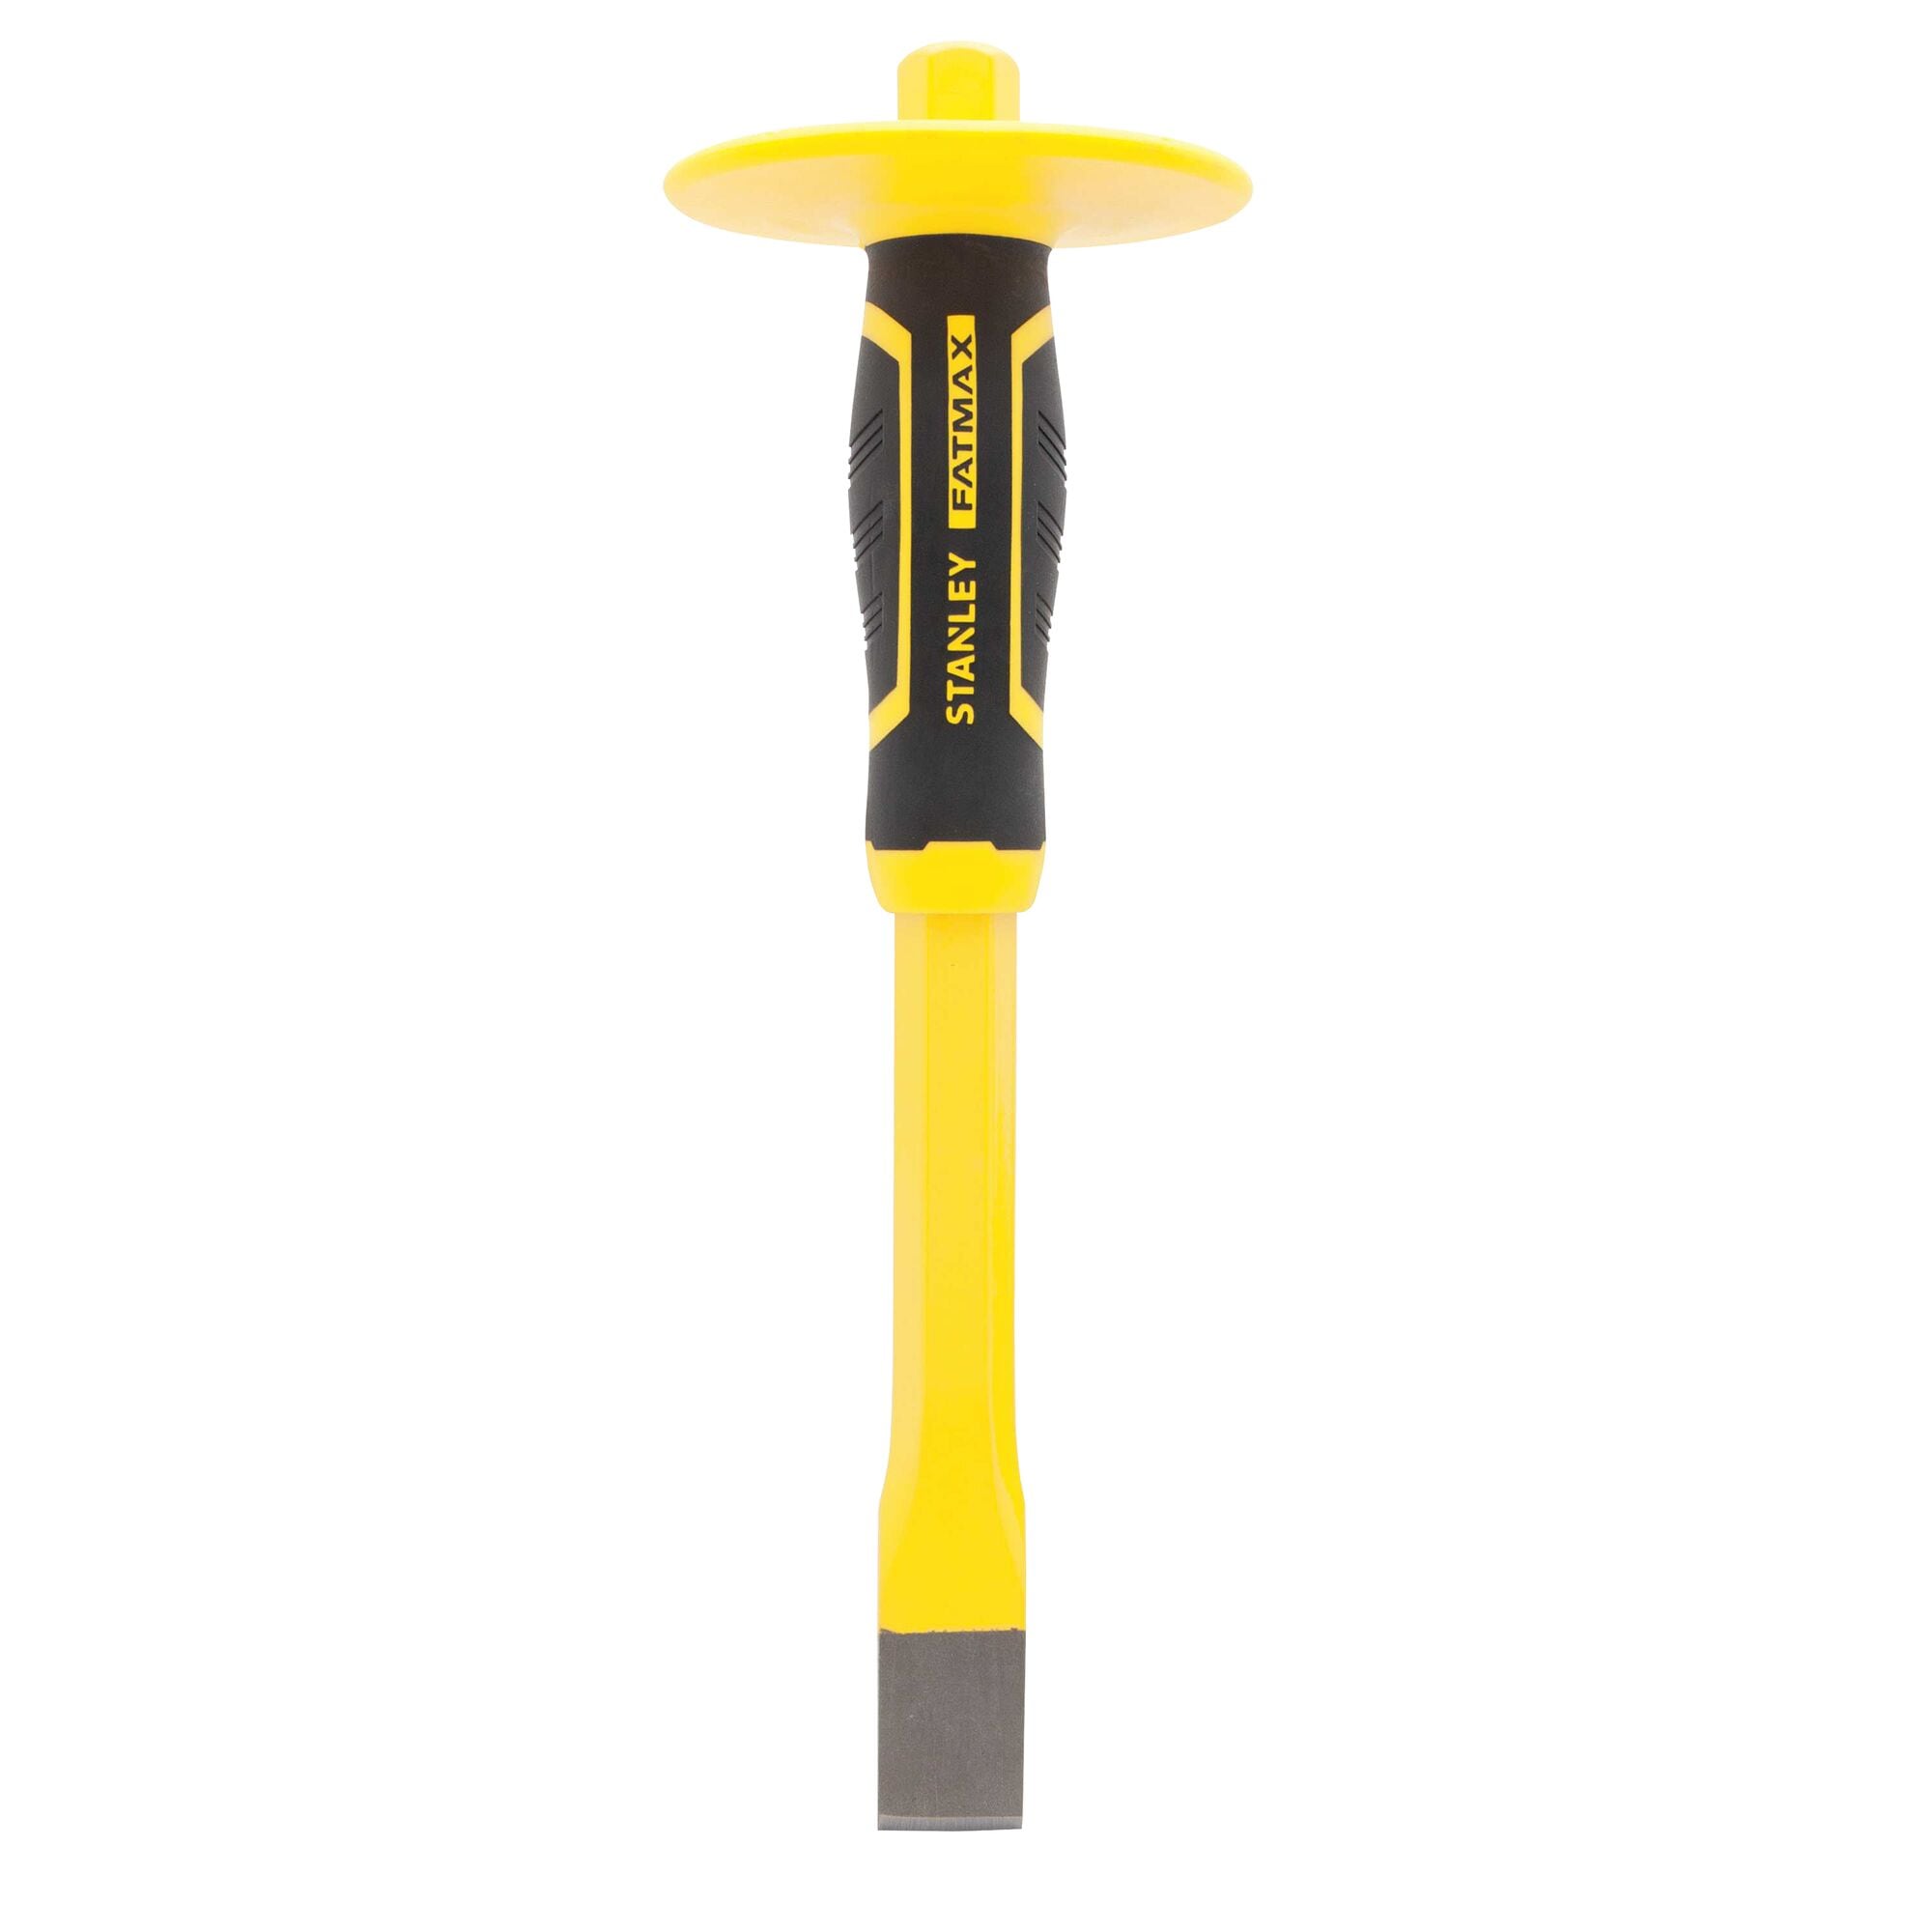 Stanley Fatmax Cold Chisel W/ Guard, 1